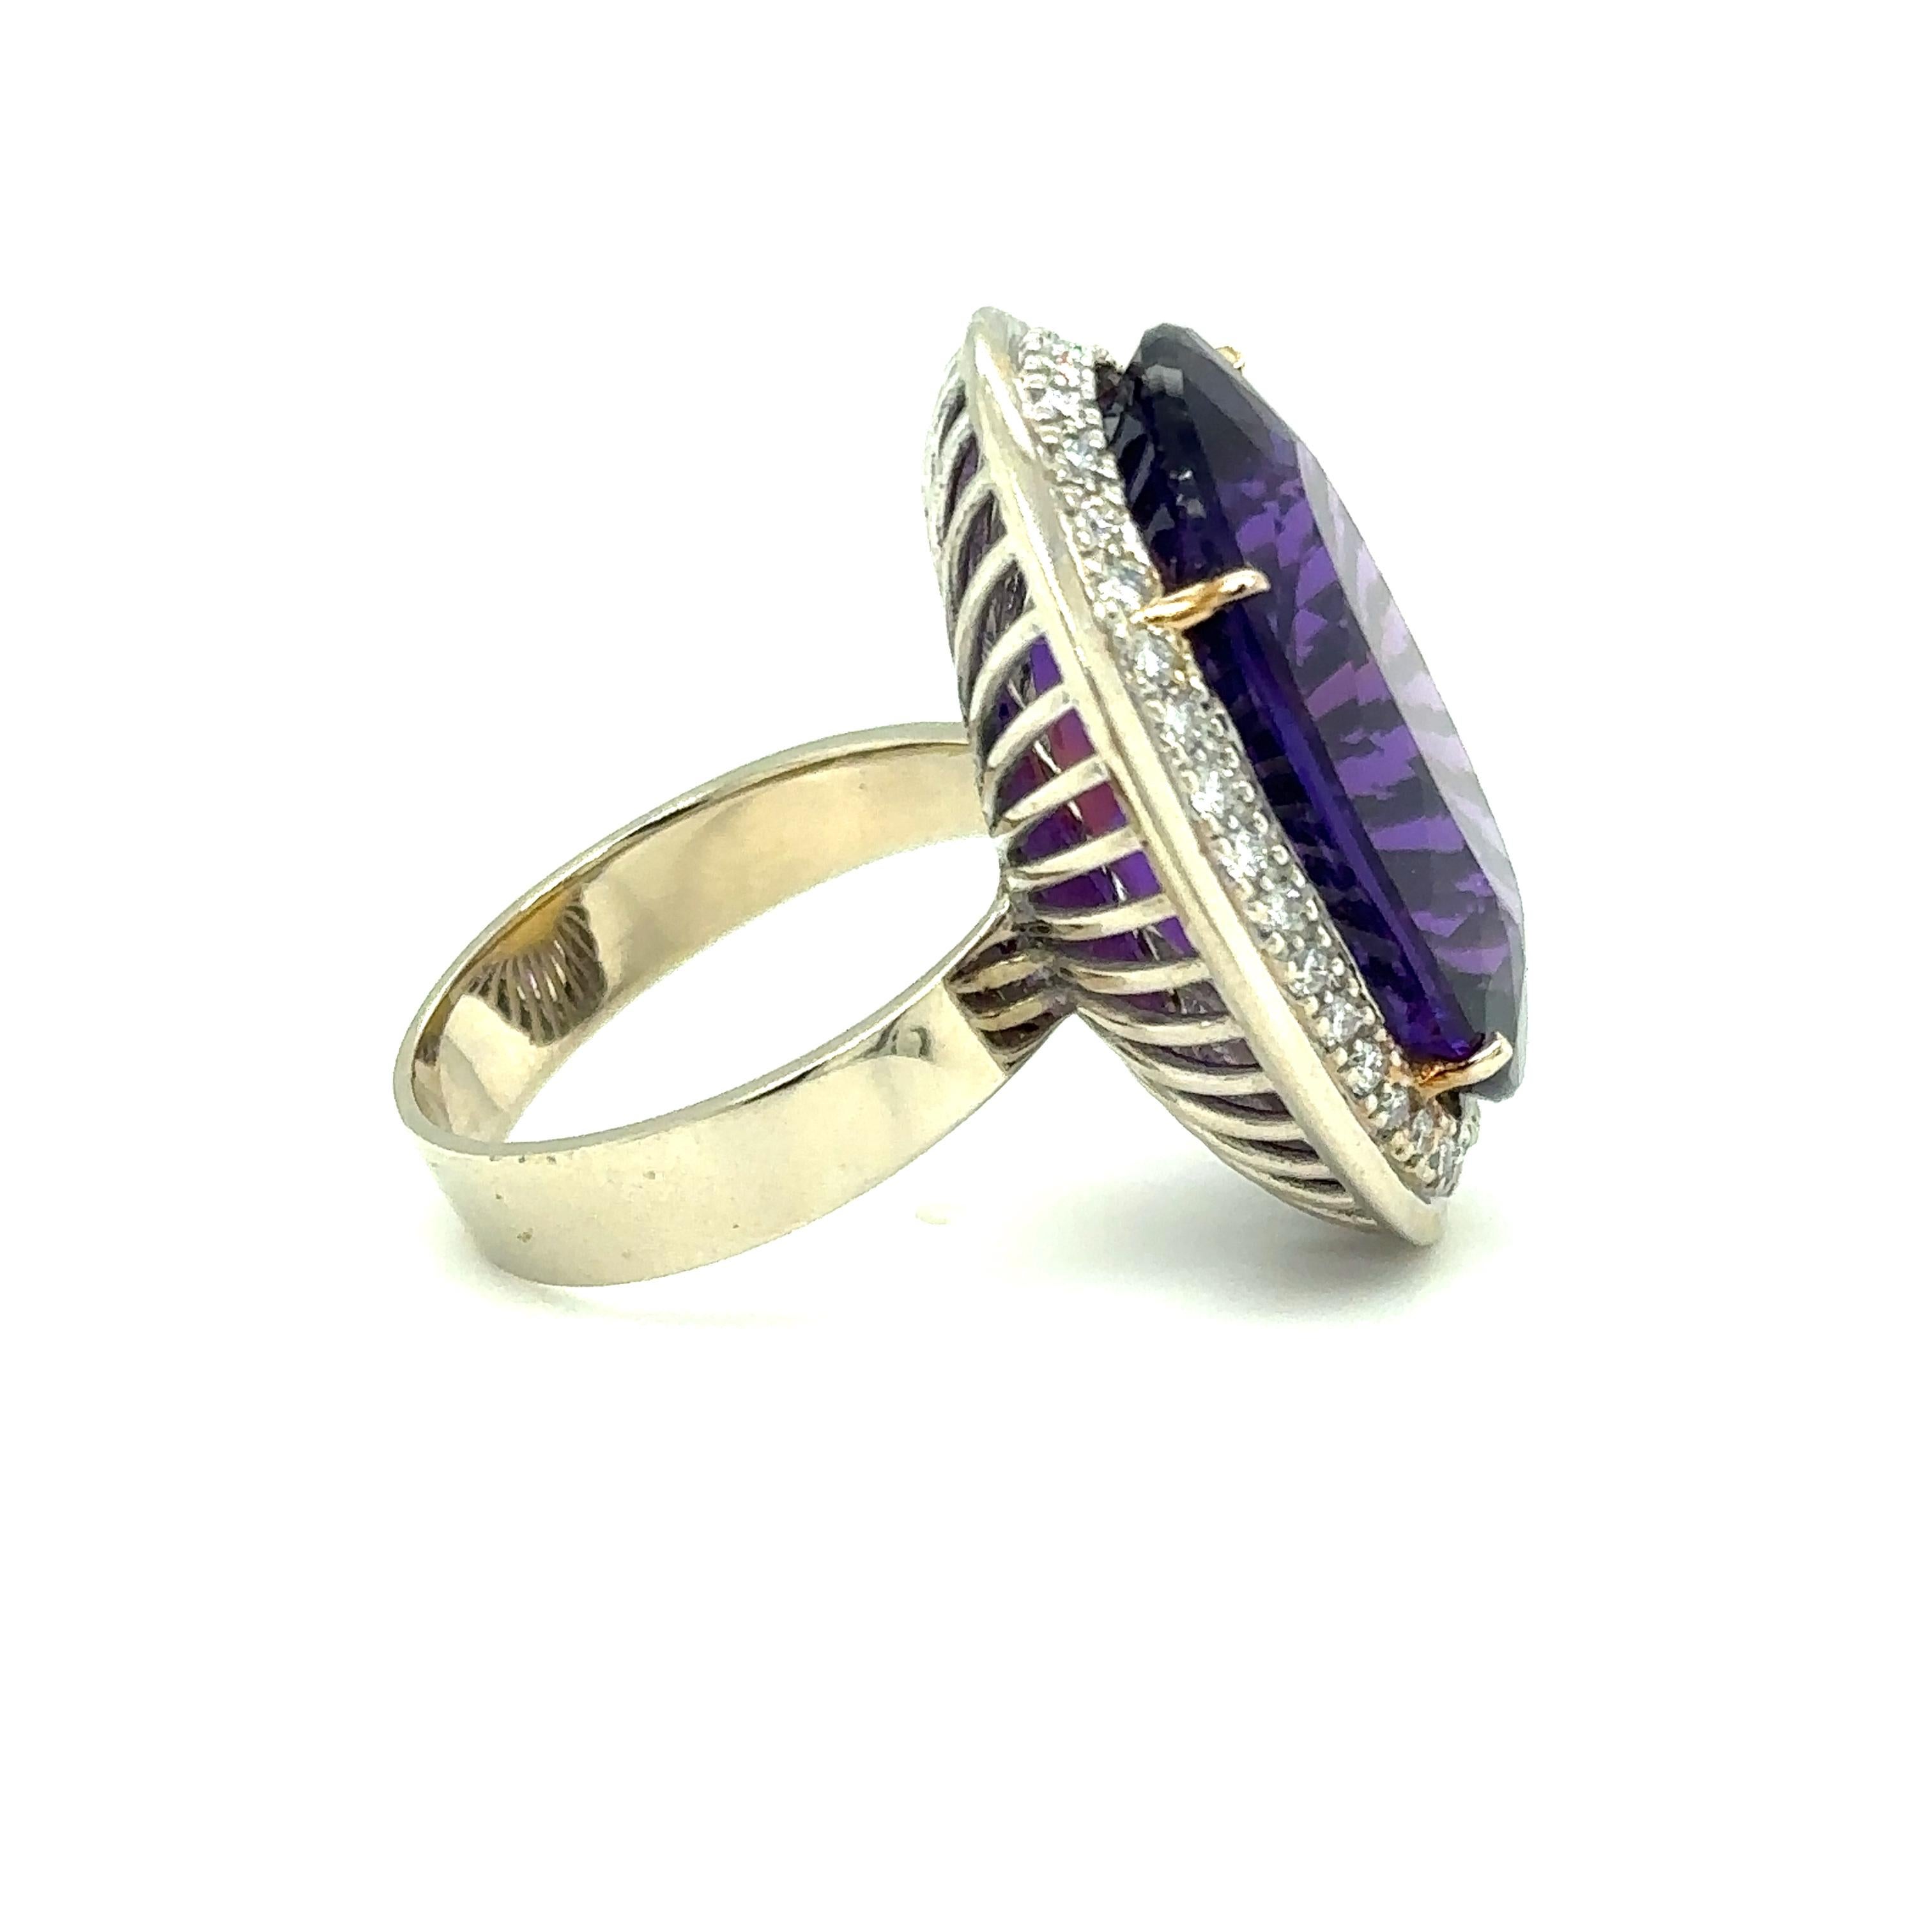 Women's or Men's Large Oval Brilliant Amethyst Ring with Diamonds in 14 Karat Gold, circa 2000s For Sale